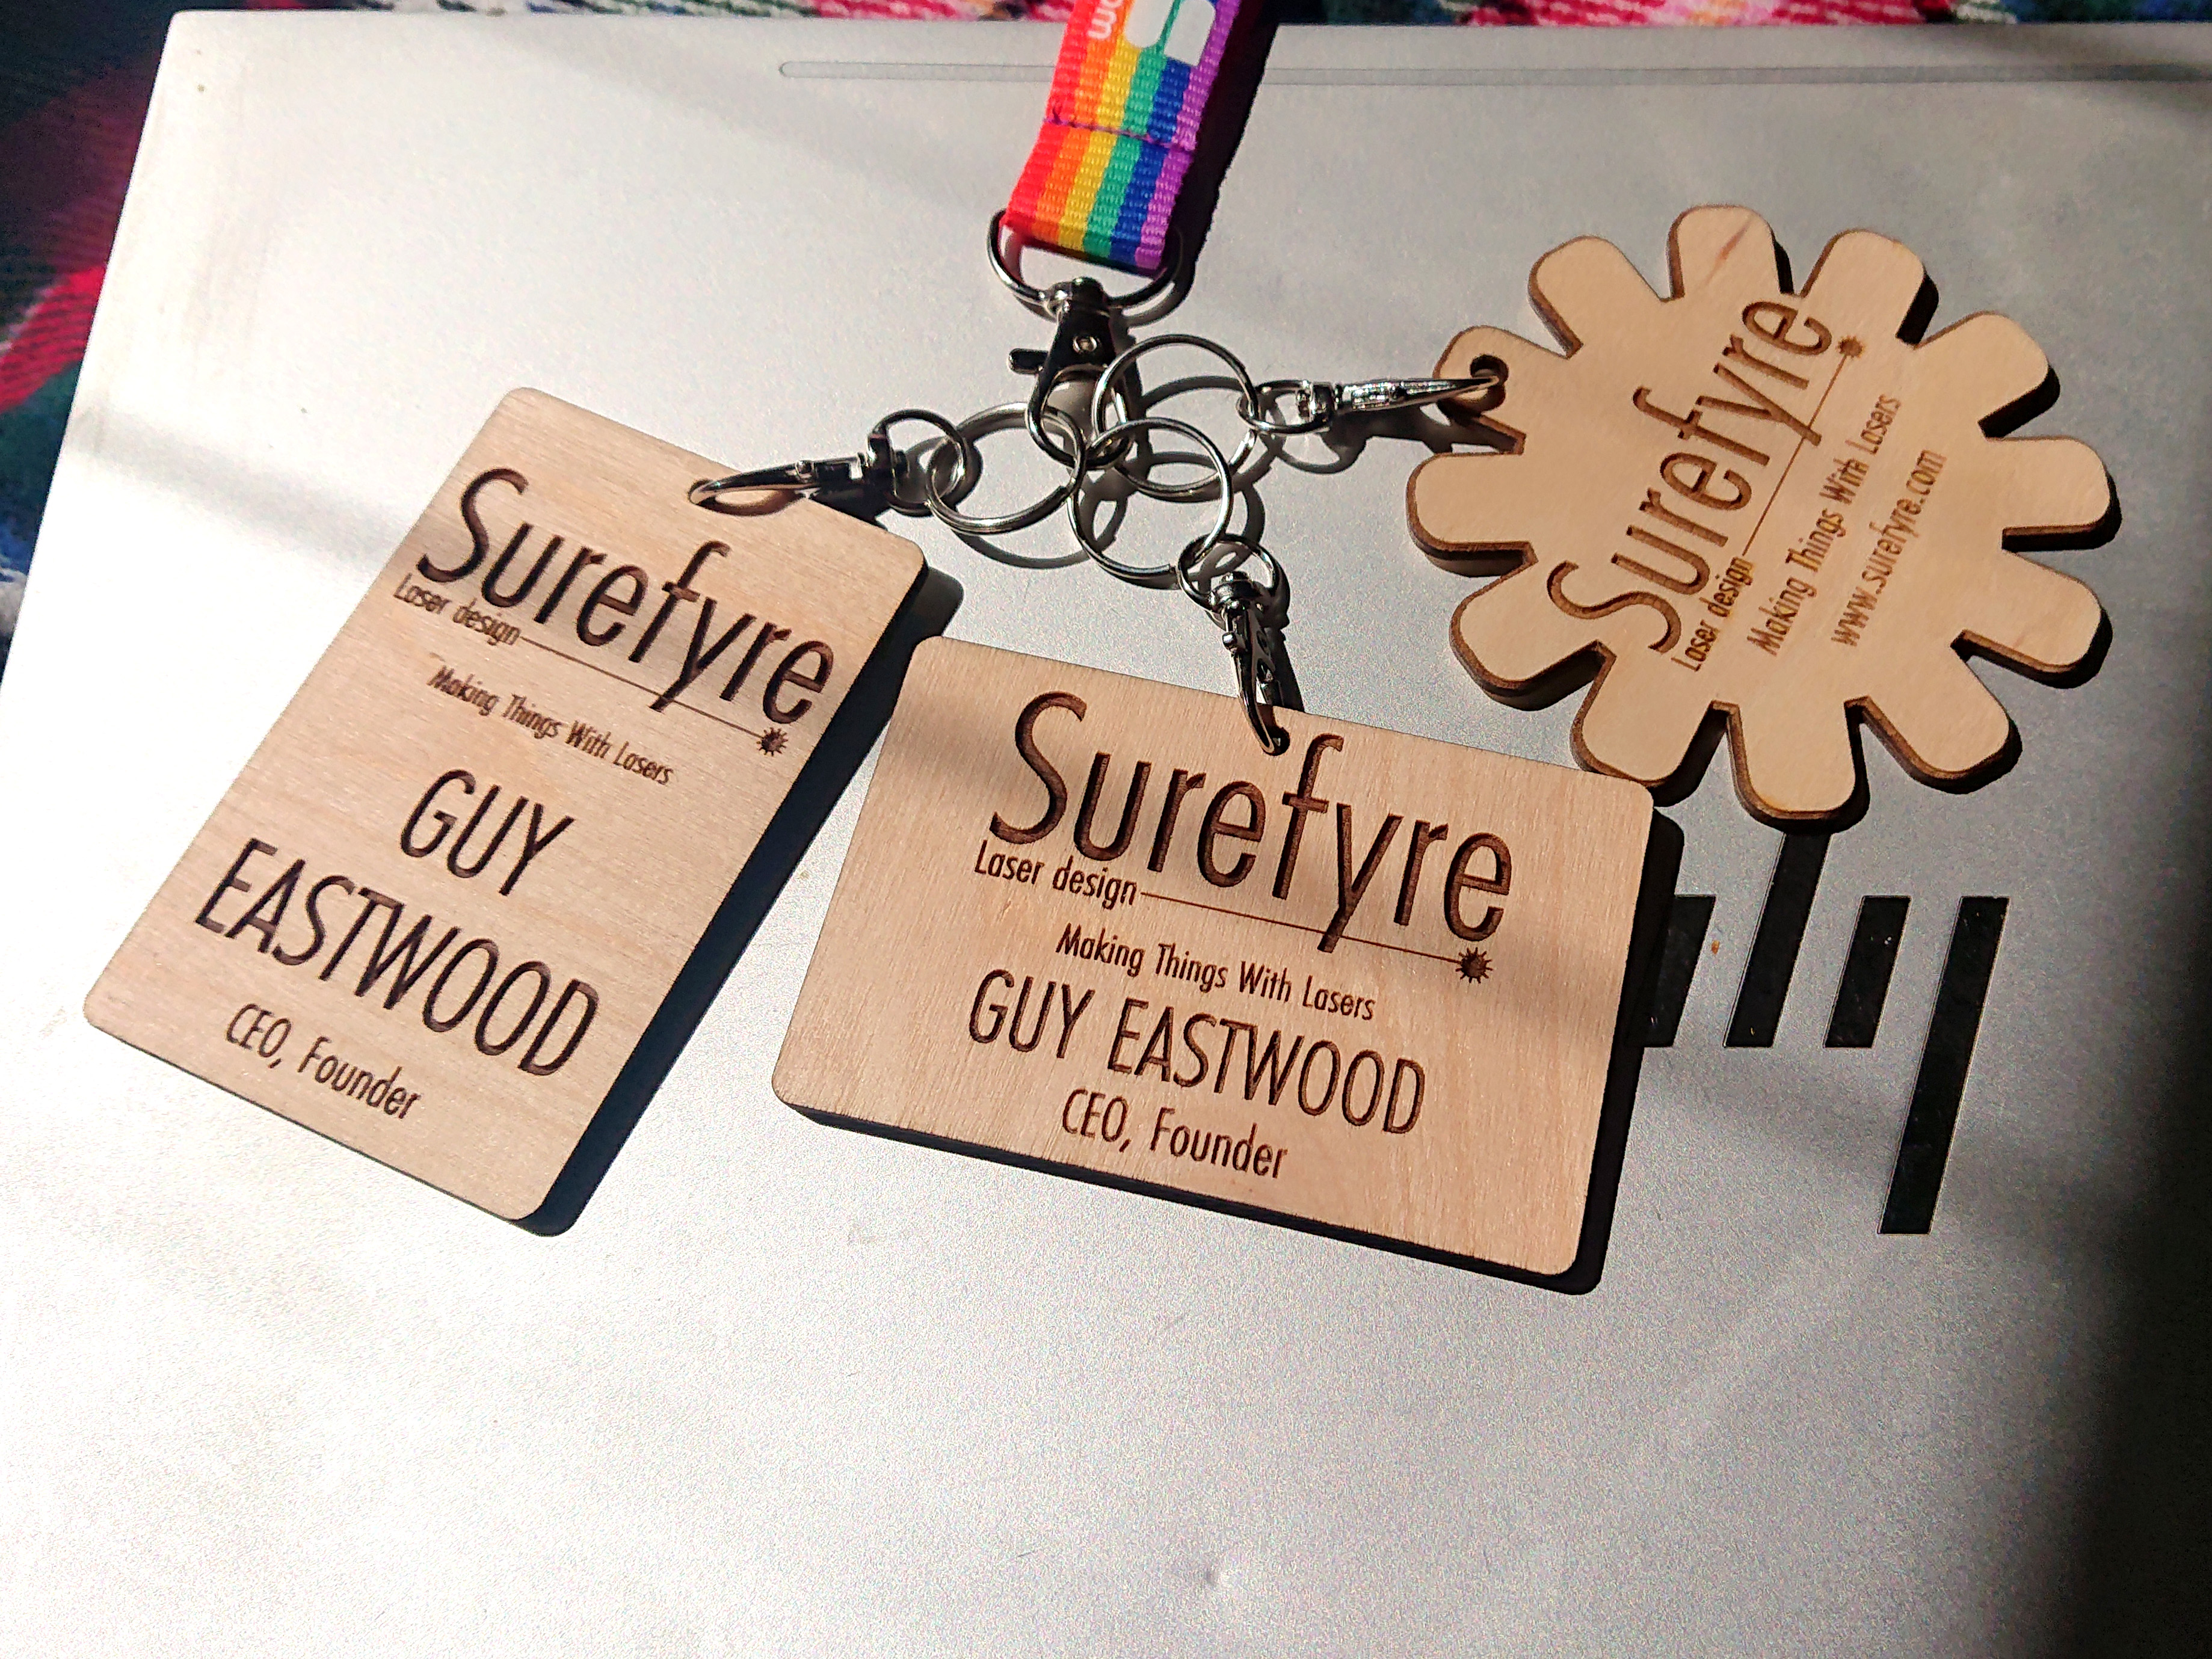 Image for New wooden contactless business tags from Surefyre Laser Design